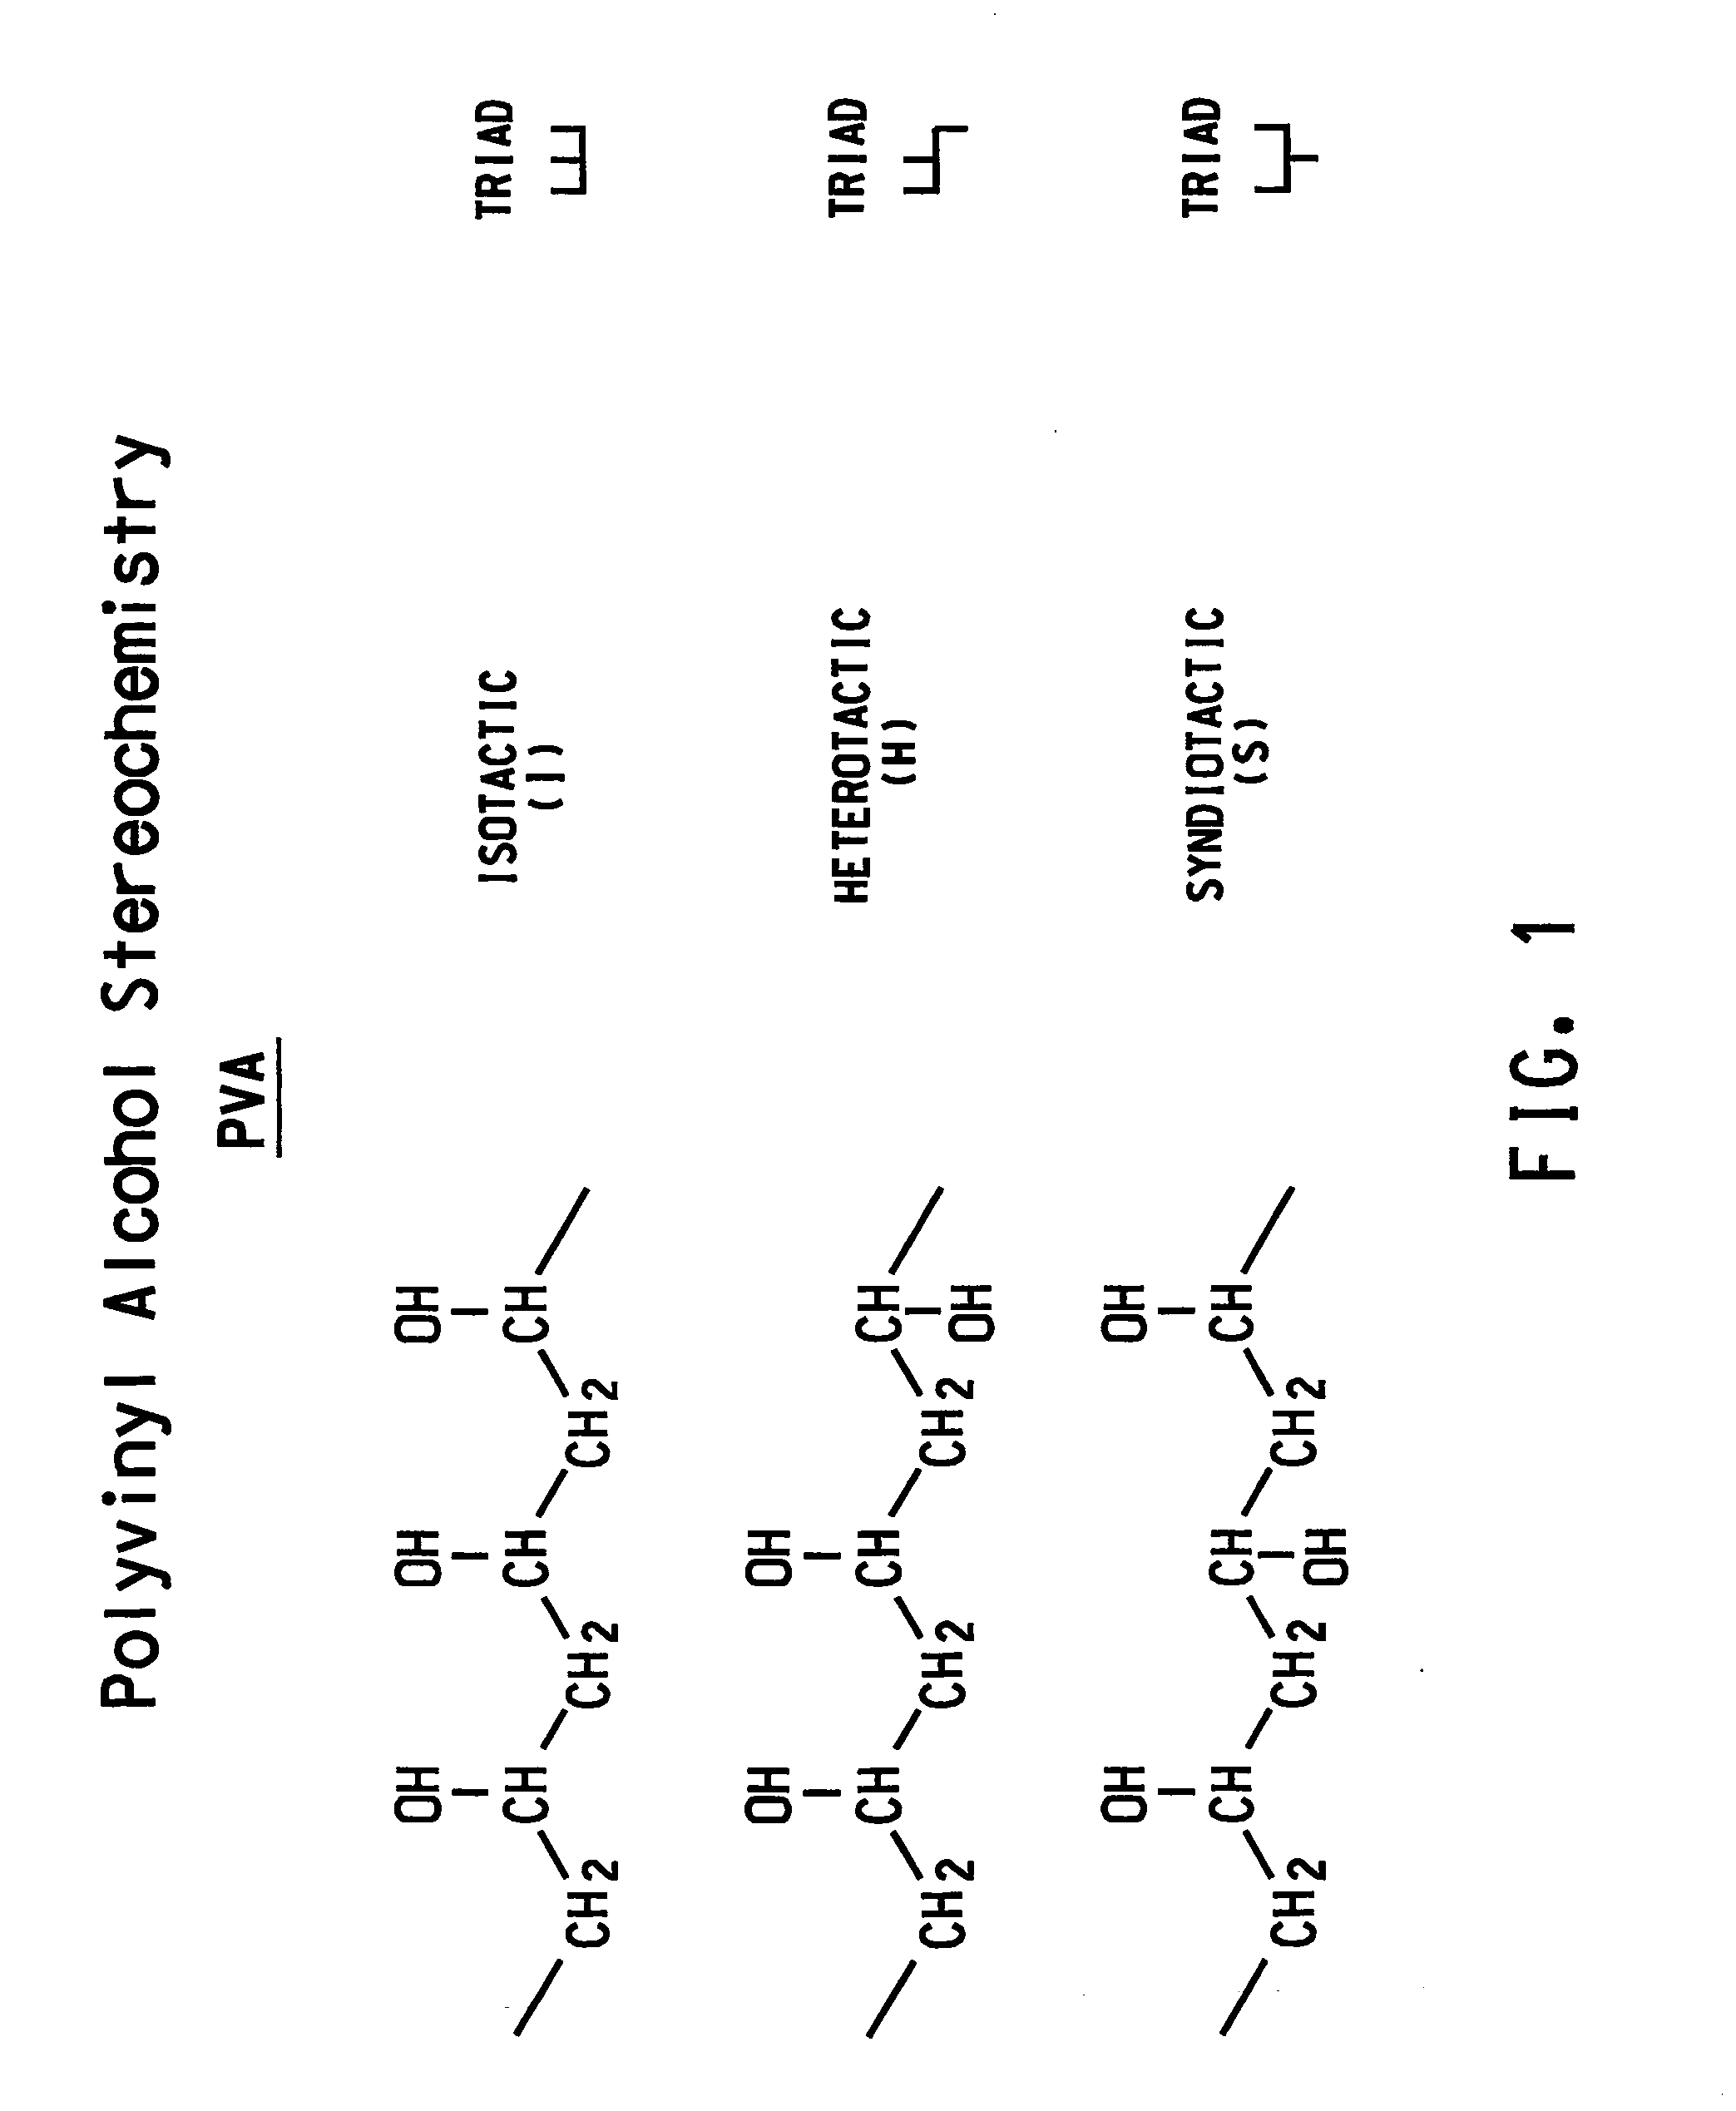 Process for controlling polyvinylbutyral physical properties by controlling stereochemistry of same